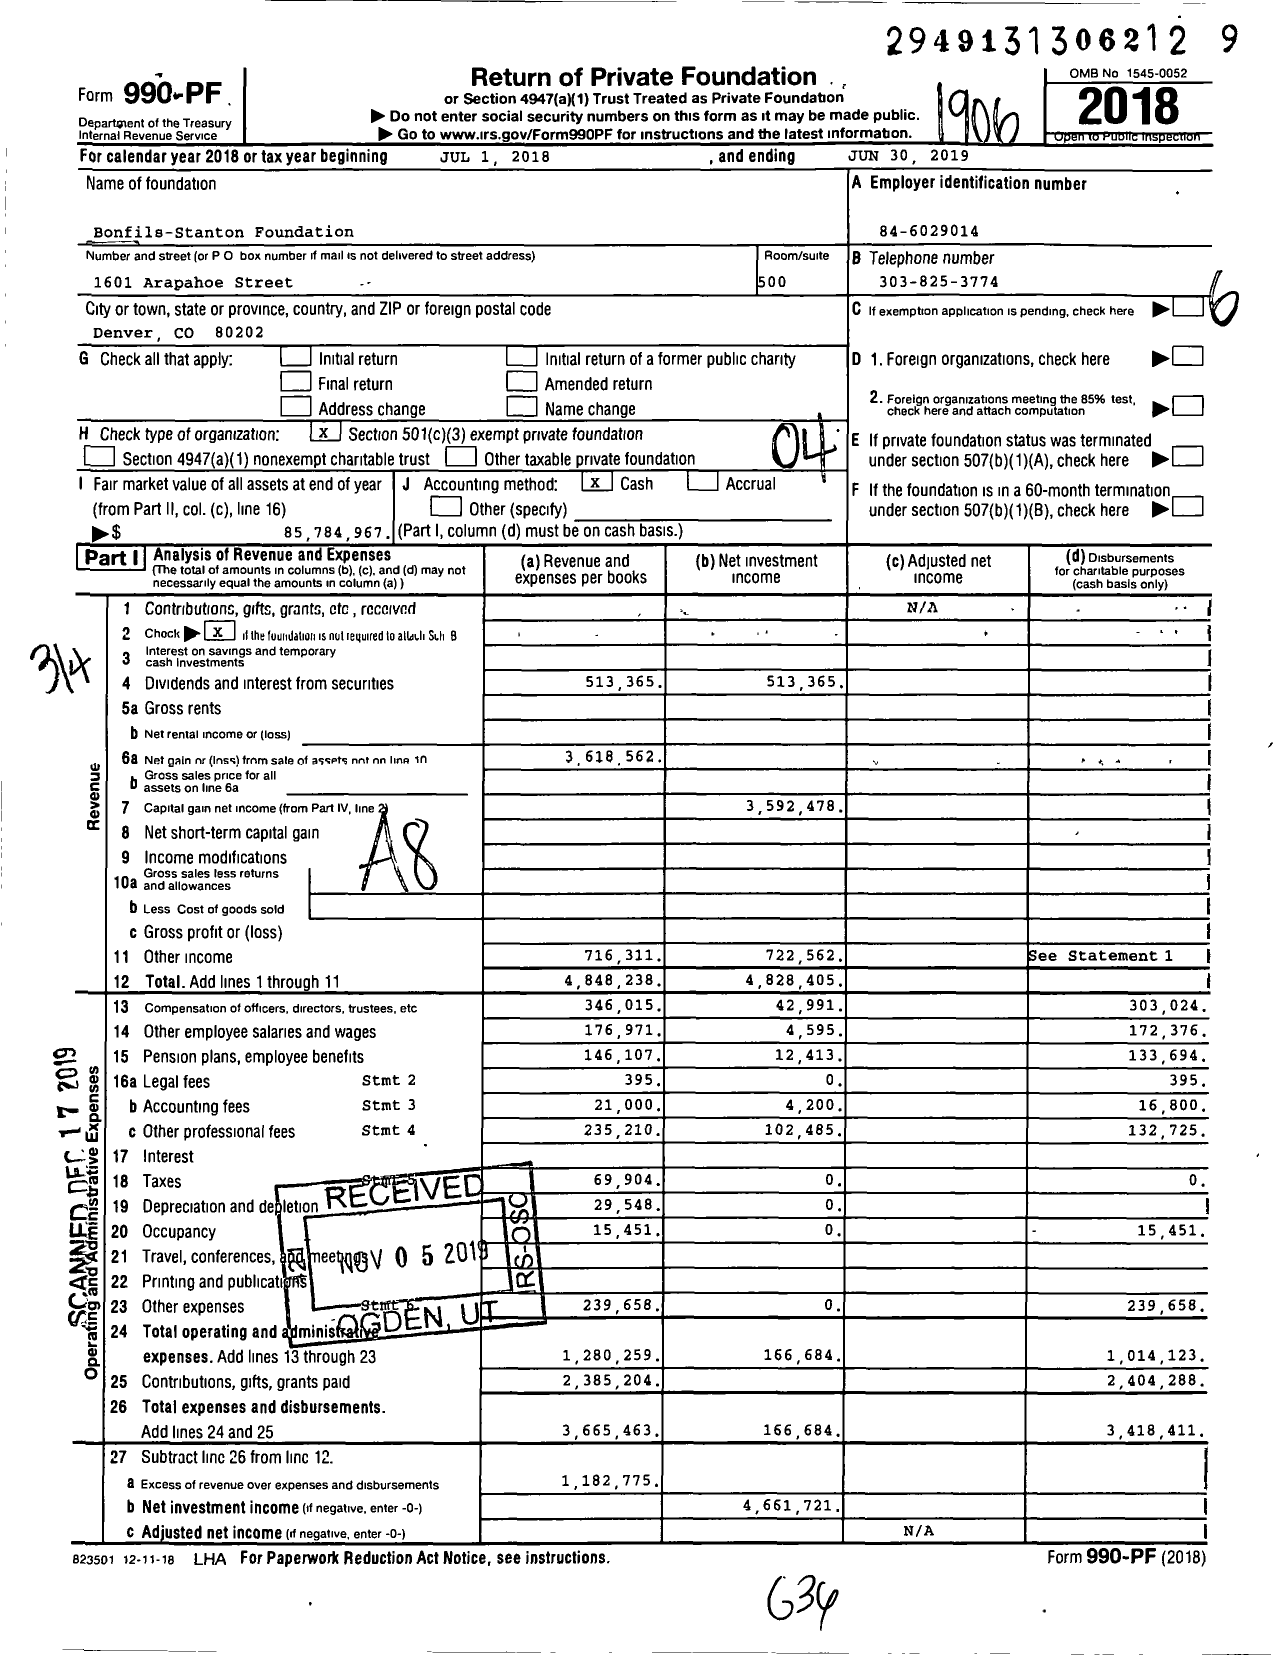 Image of first page of 2018 Form 990PF for Bonfils-Stanton Foundation